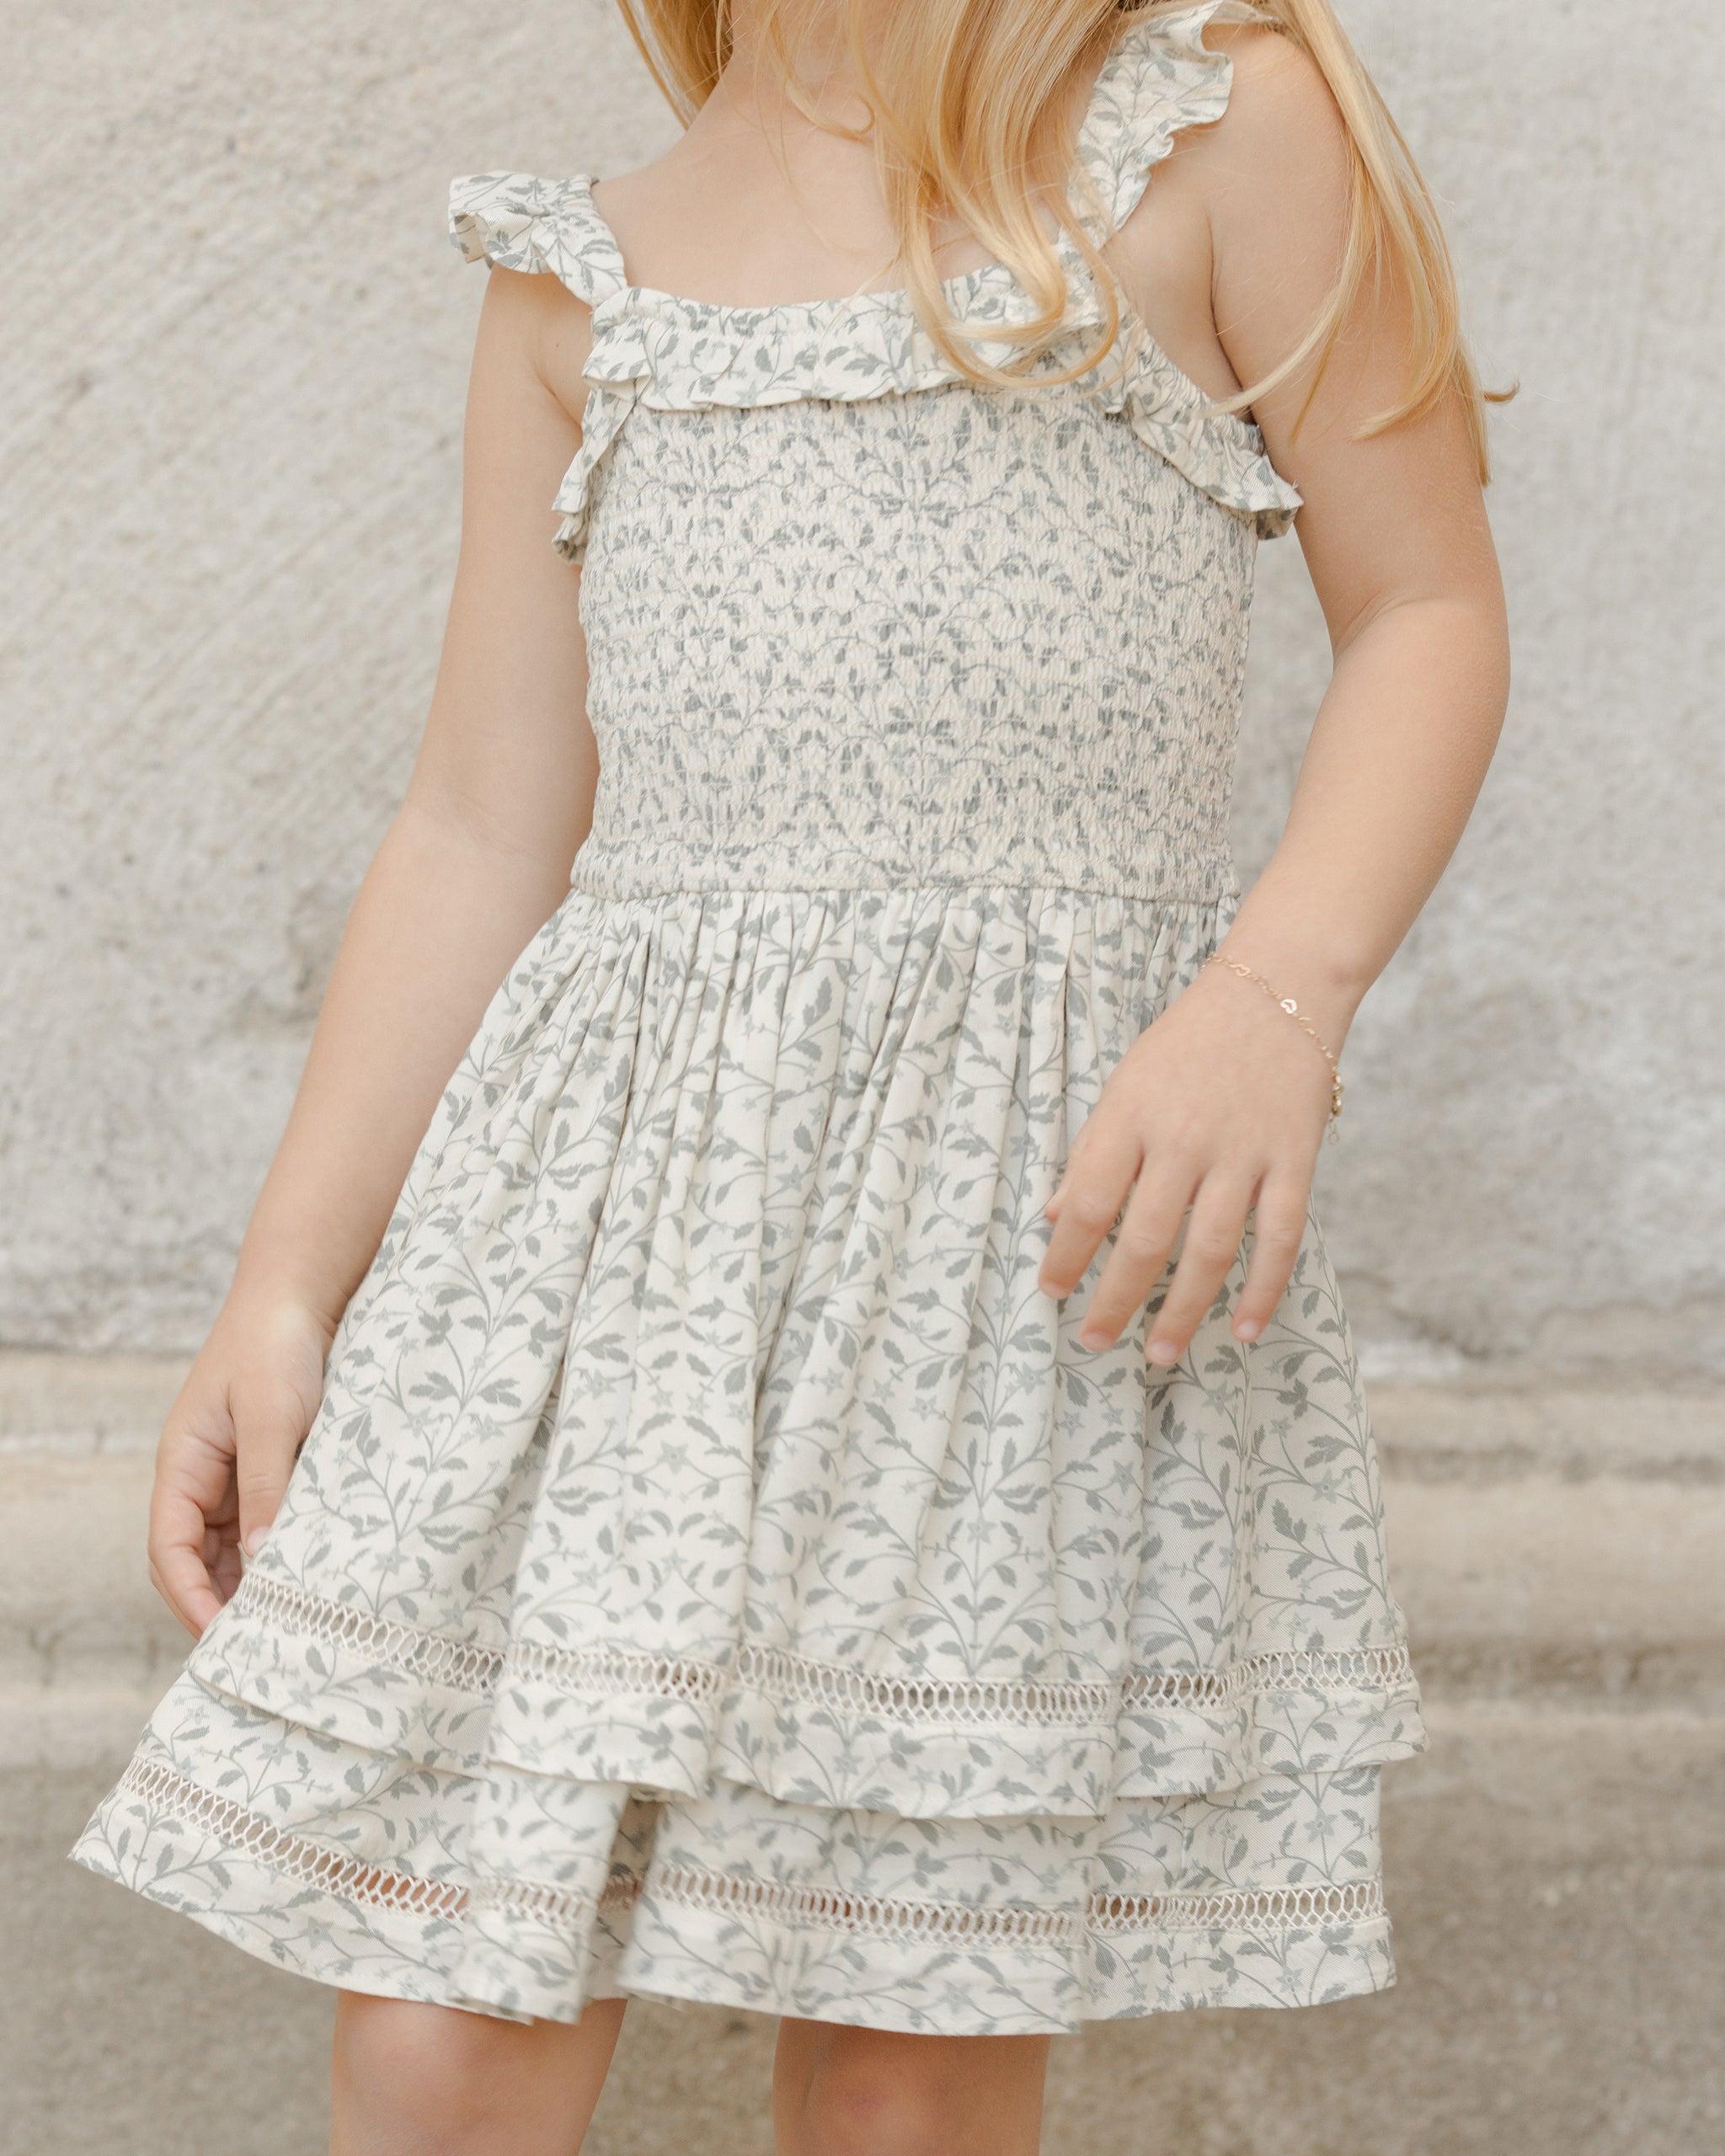 Birdie Dress || Lily Fields - Rylee + Cru | Kids Clothes | Trendy Baby Clothes | Modern Infant Outfits |